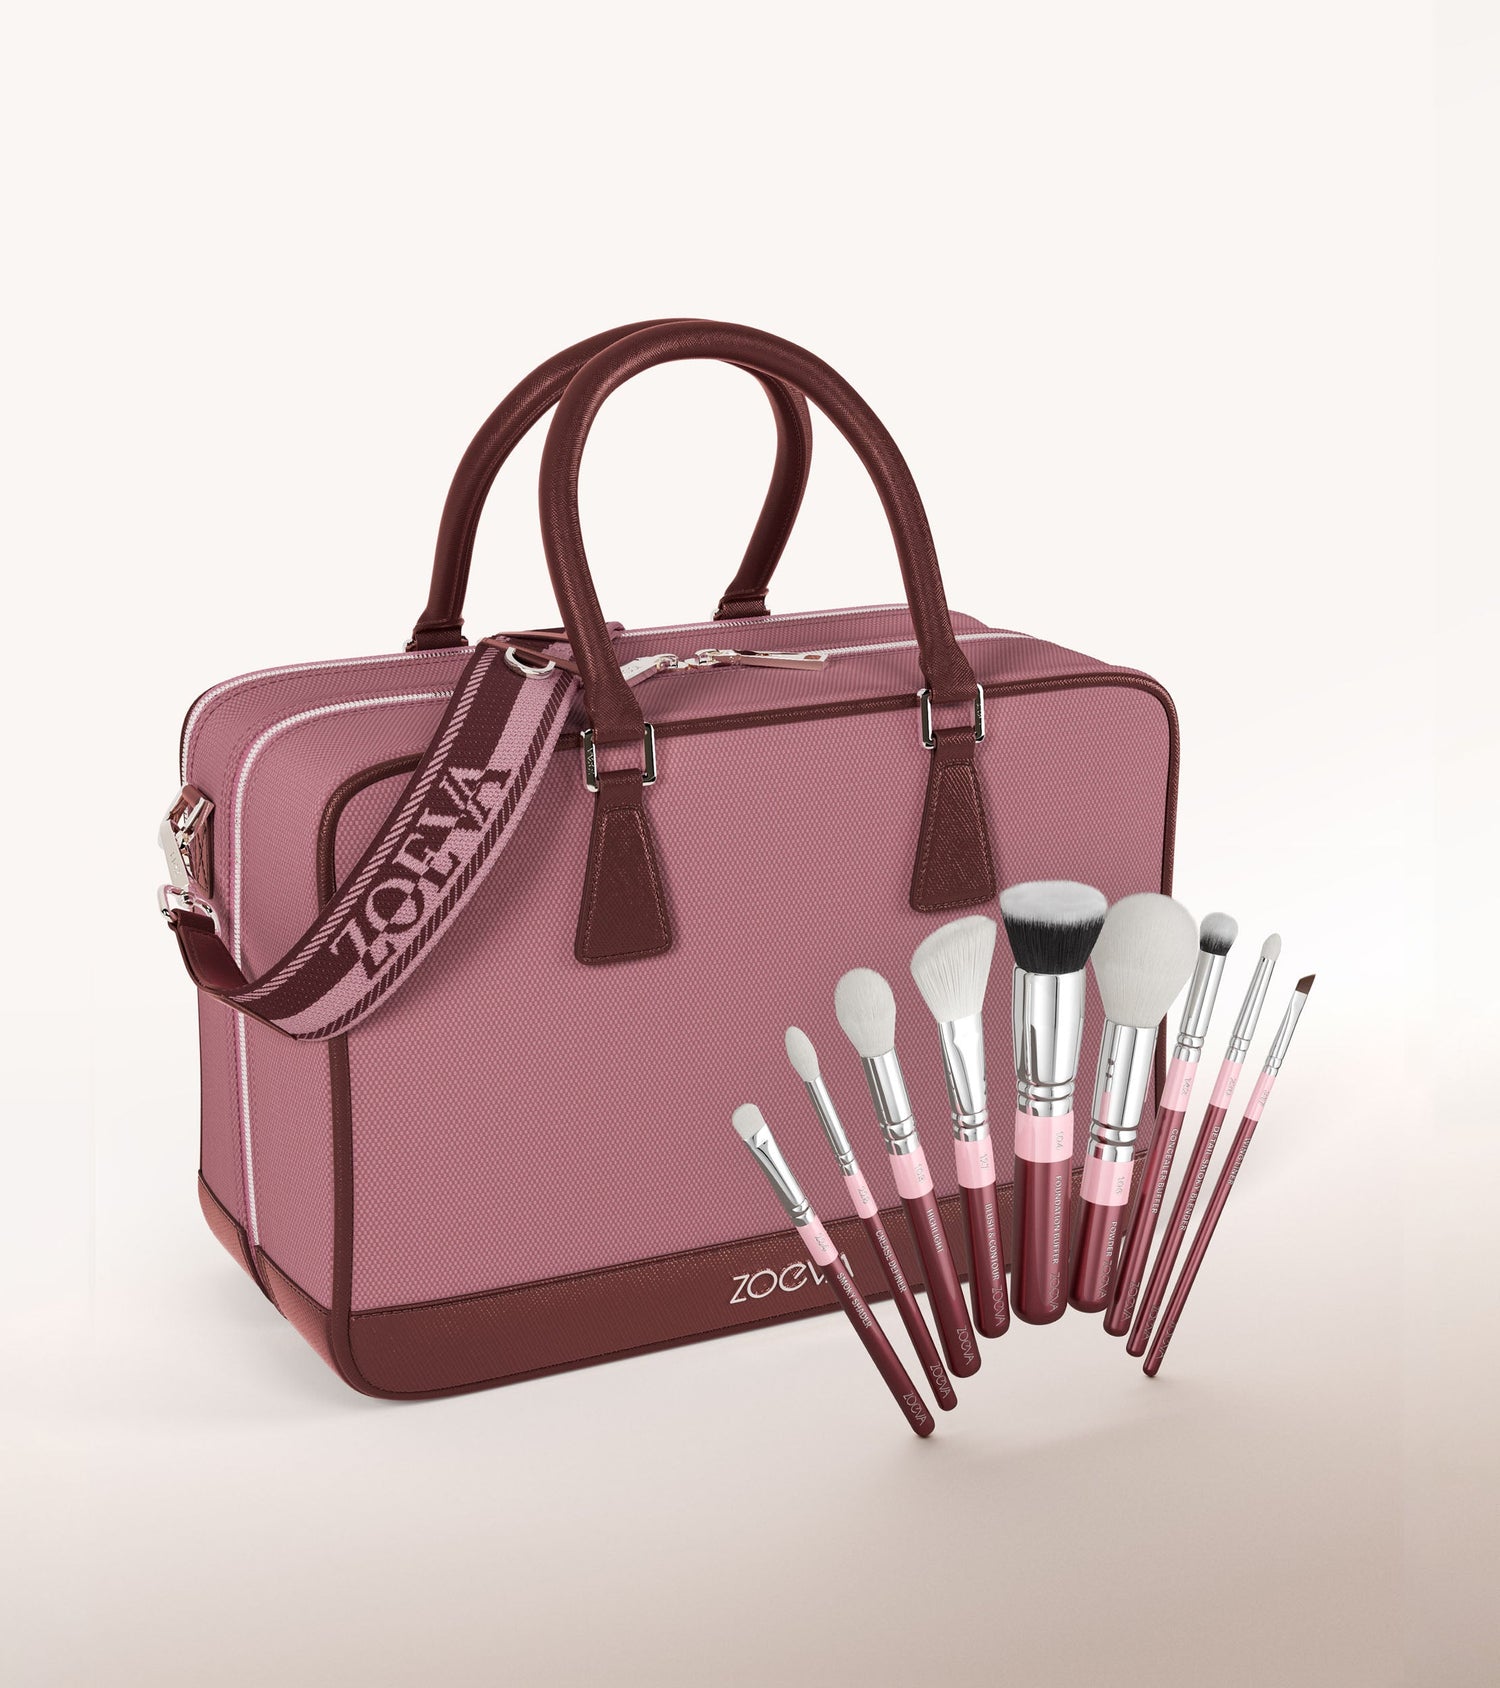 The Zoe Bag & The Complete Brush Set (Dusty Bordeaux) Main Image featured